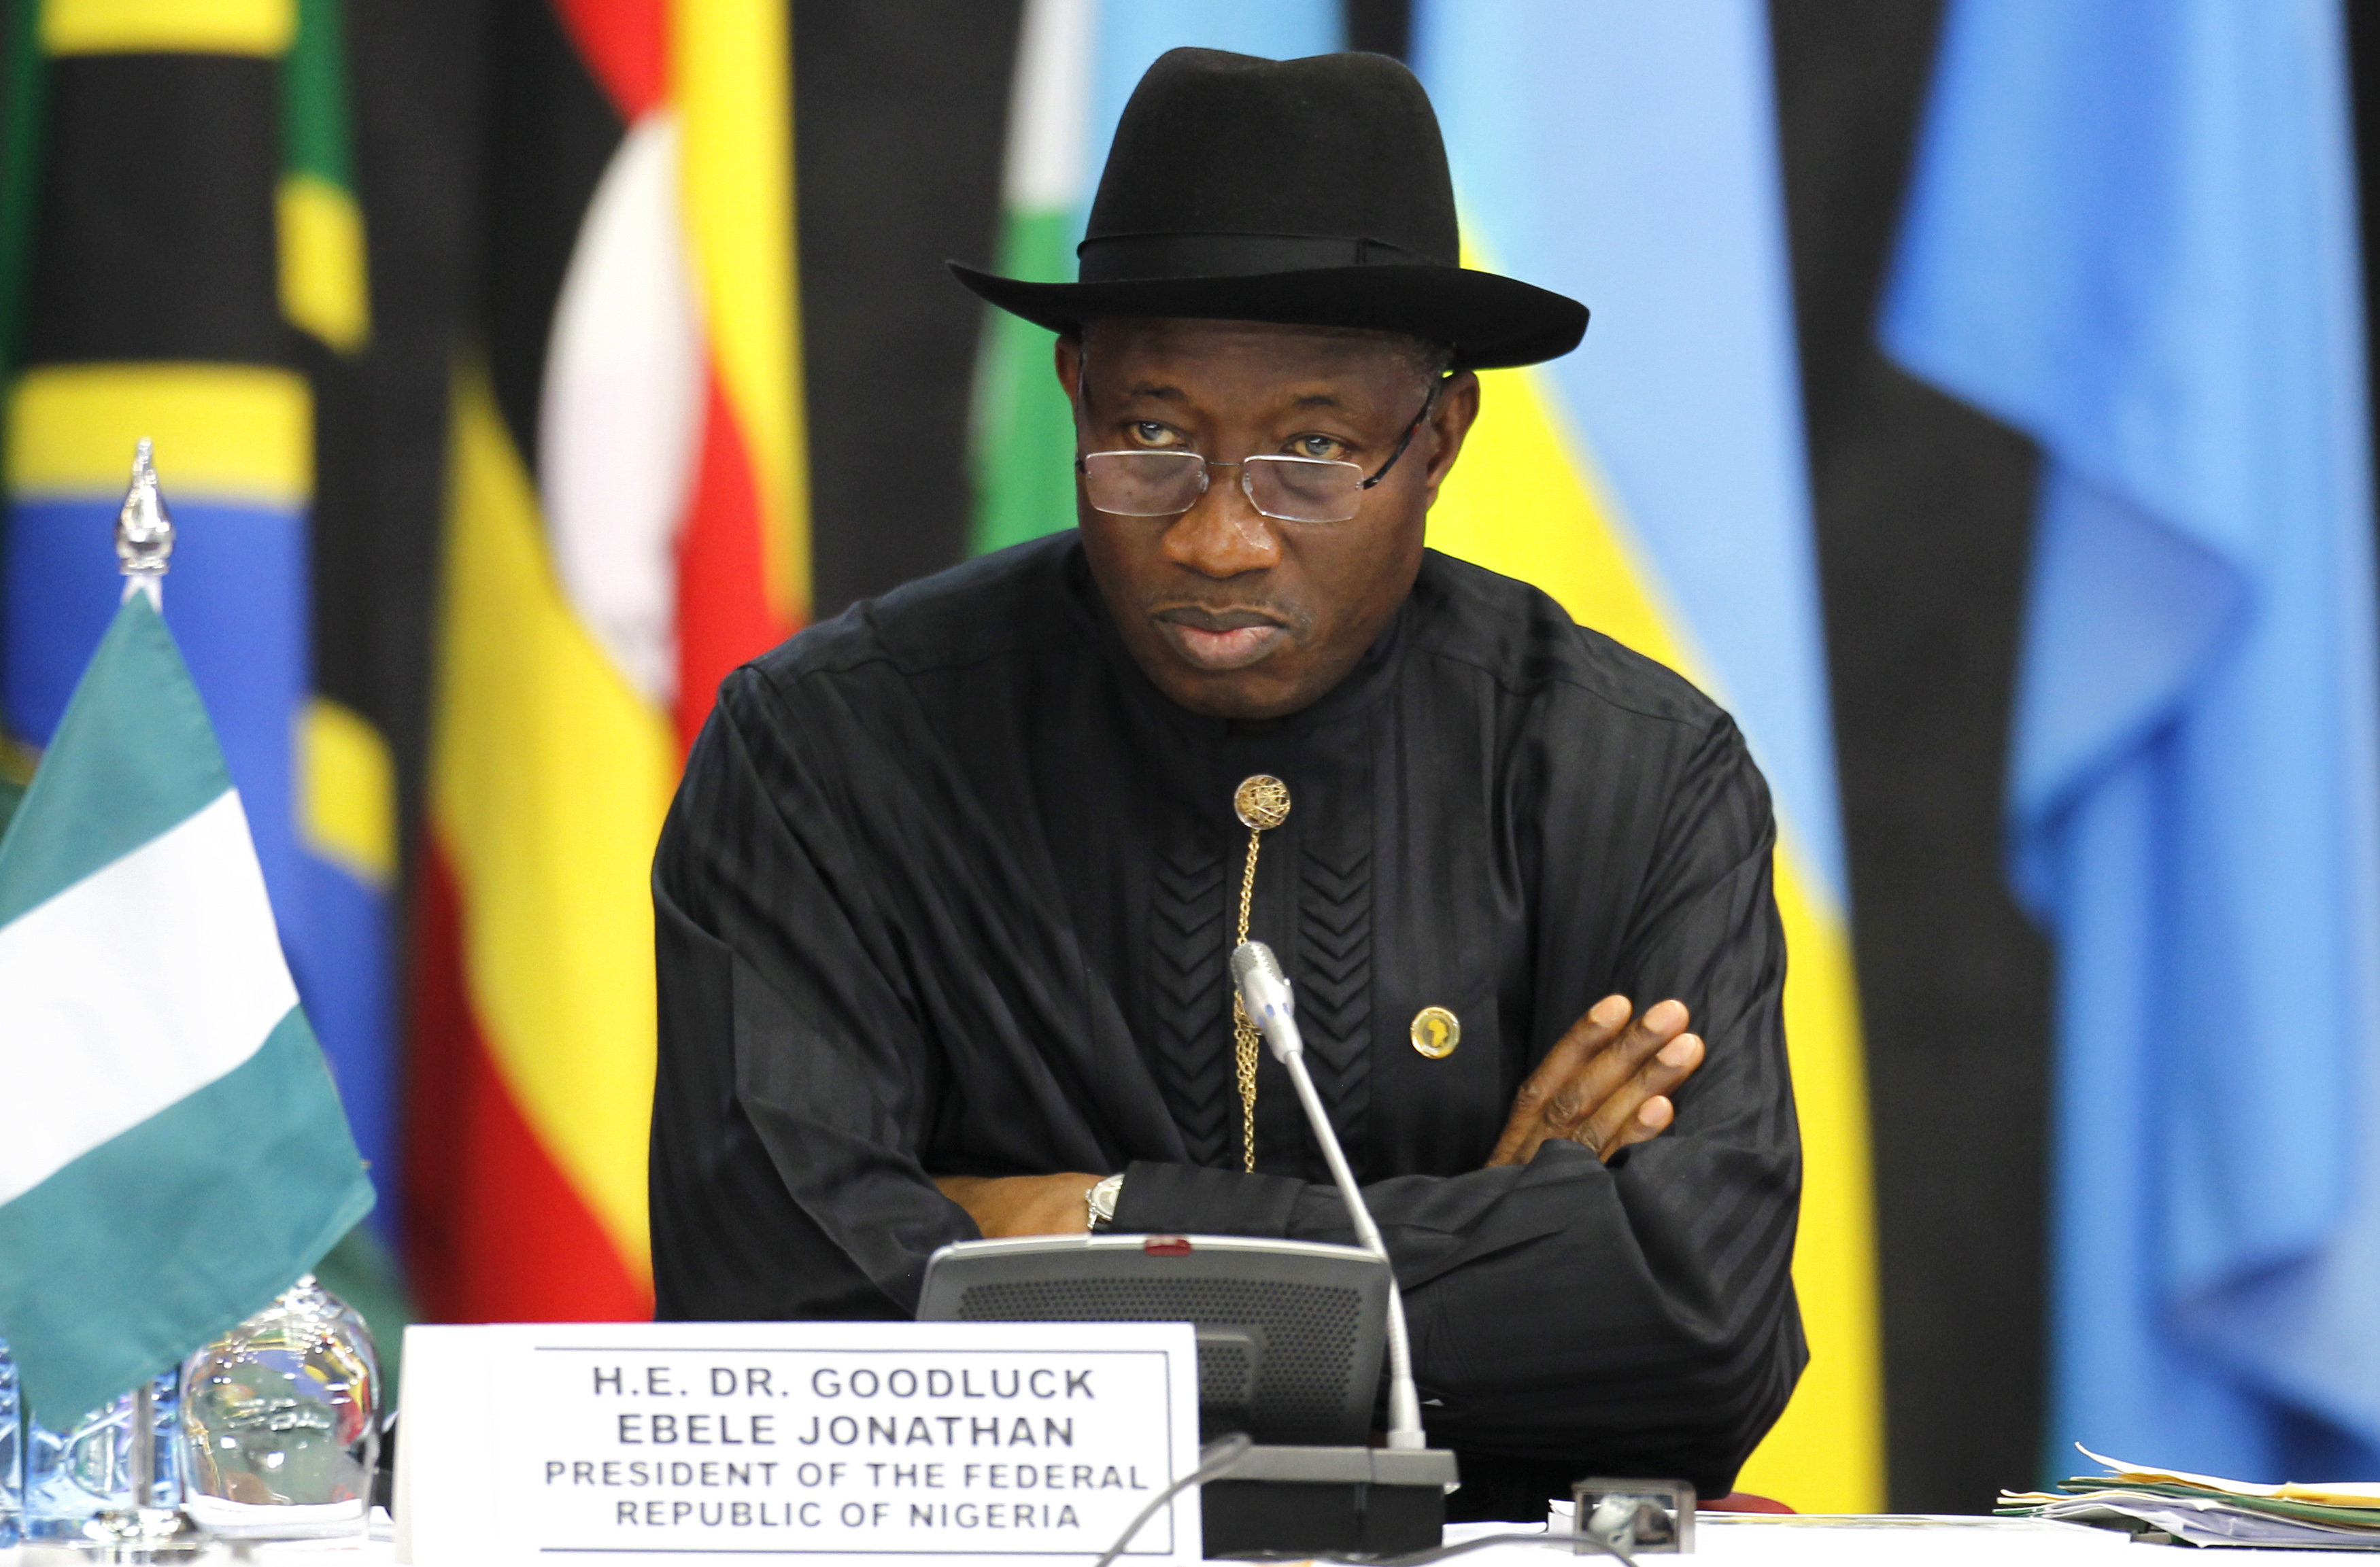 Nigeria's President Goodluck Jonathan attends the Africa Union Peace and Security Council Summit on Terrorism at the Kenyatta International Convention Centre in Nairobi on Sept. 2, 2014 (Thomas Mukoya—Reuters)